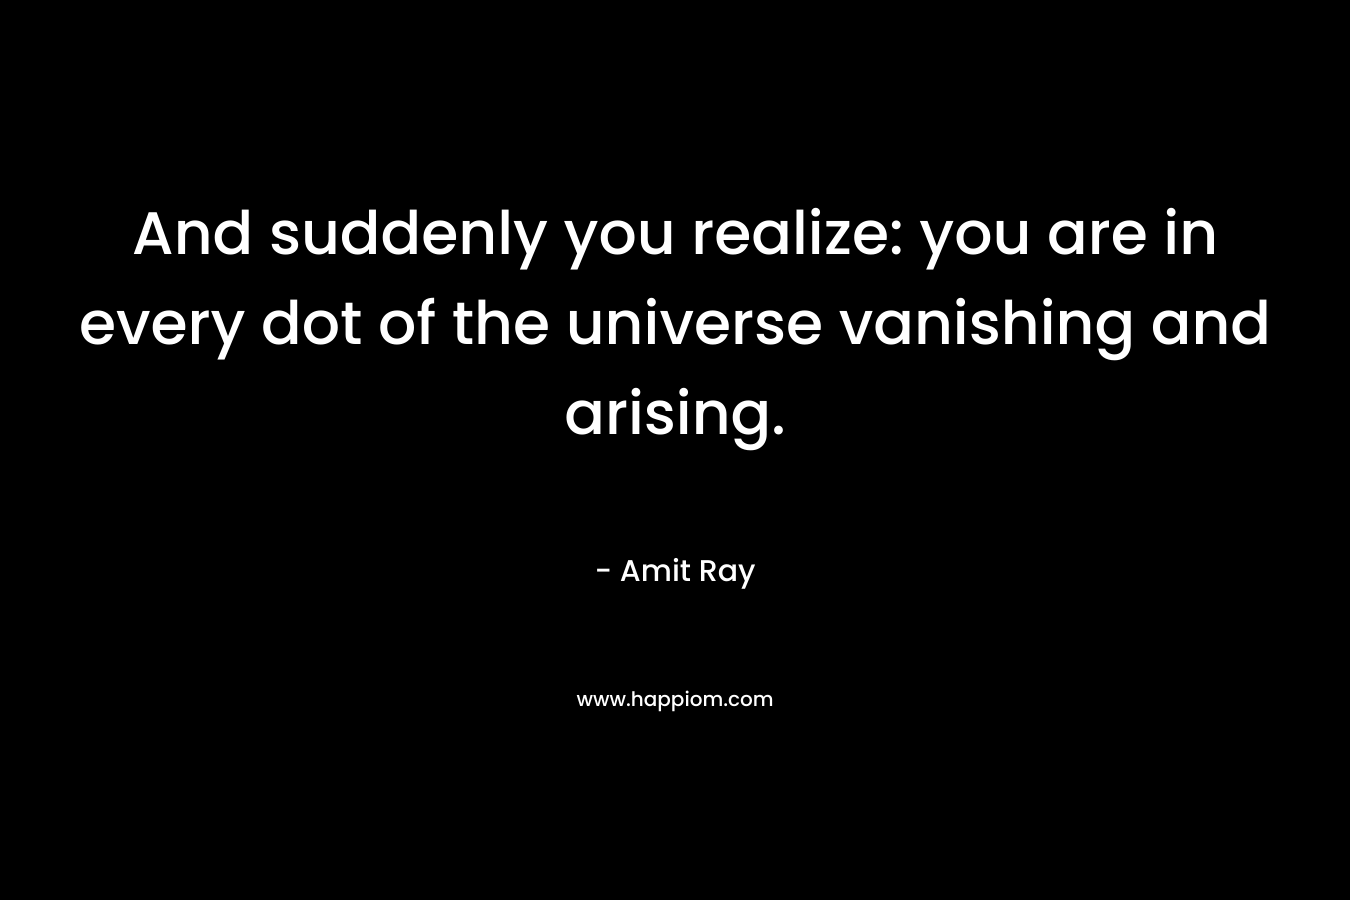 And suddenly you realize: you are in every dot of the universe vanishing and arising.